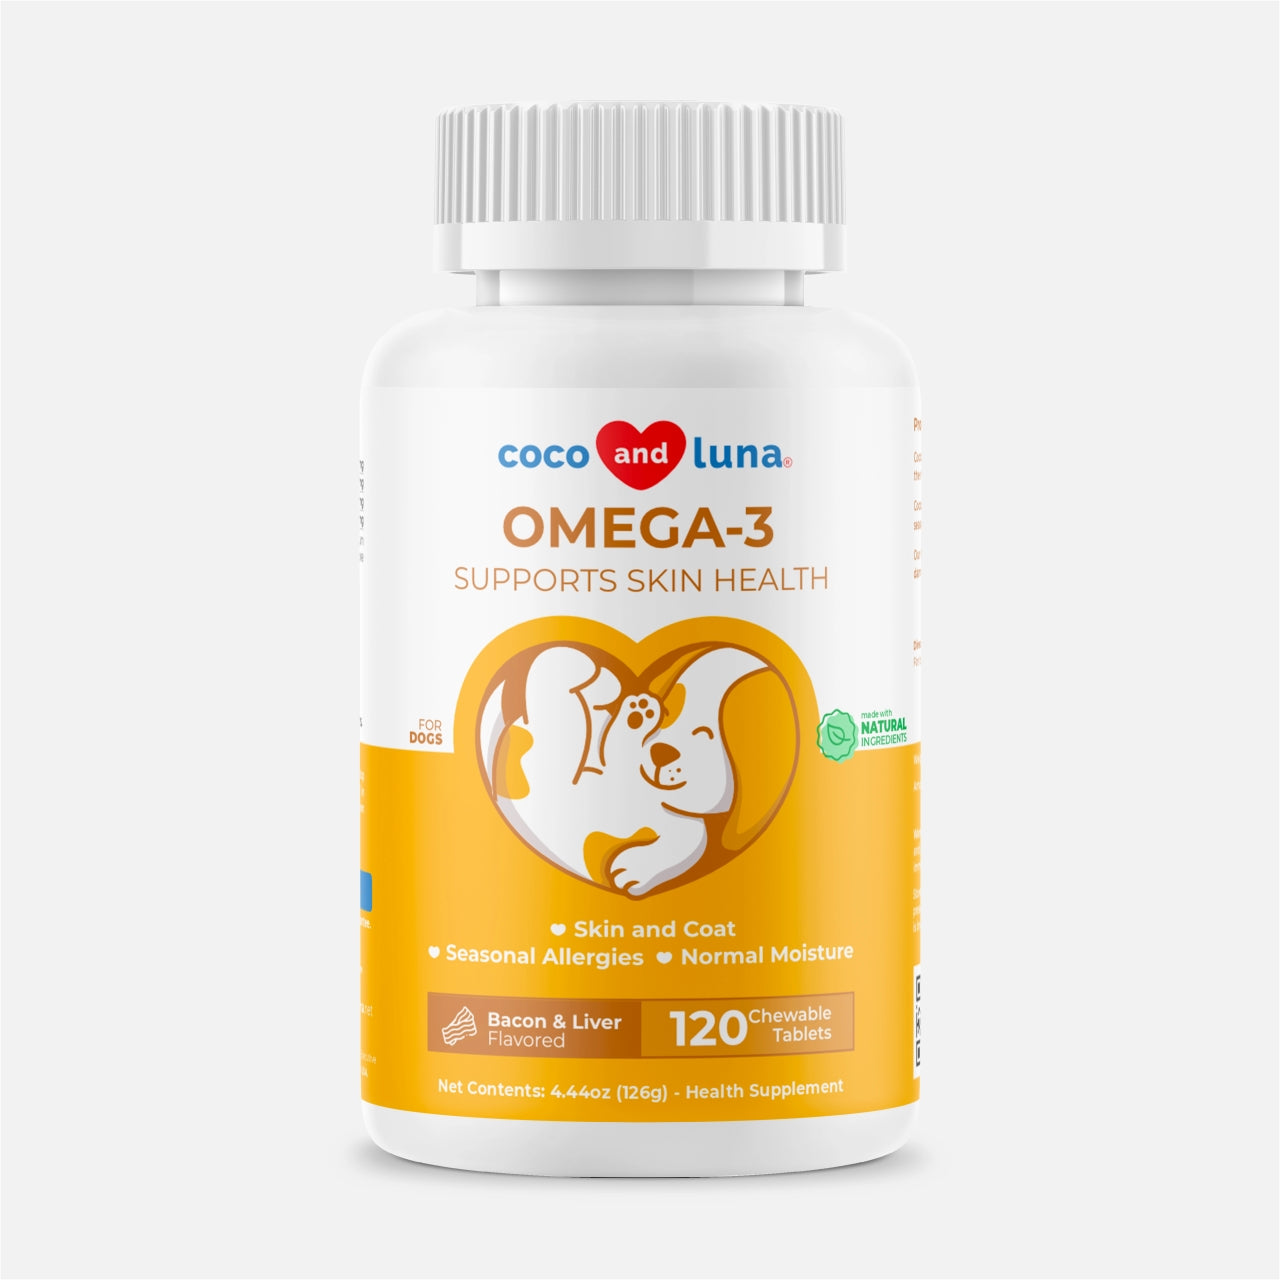 Omega 3 for Dogs - 120 Chewable Tablets - Coco and Luna